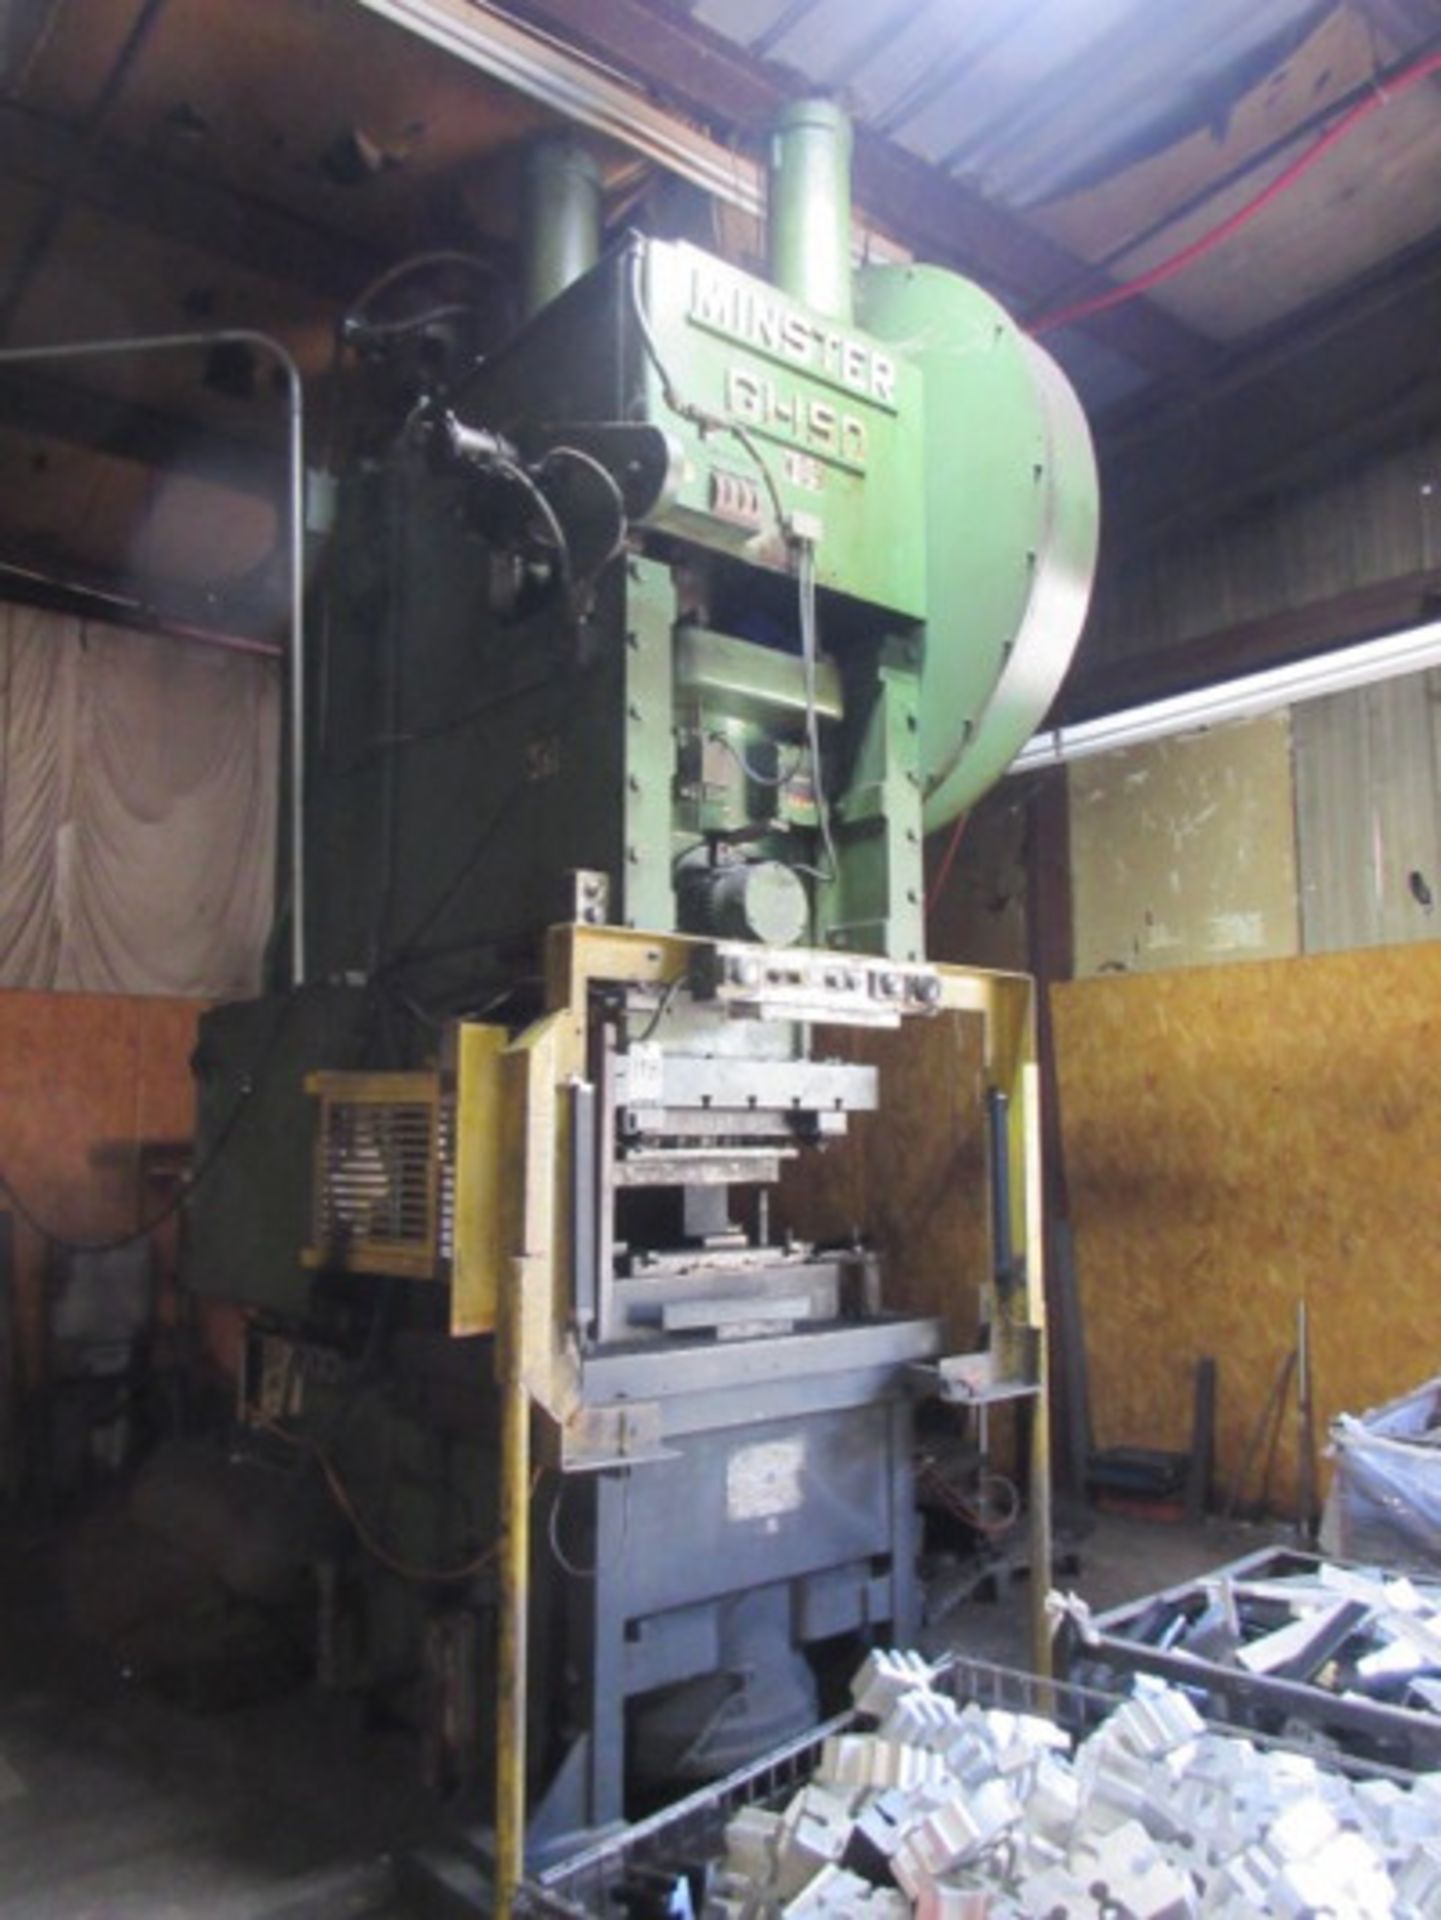 Minster Straight Sided 150 Ton Press, M/N- G1-150, S/N- G1-150-21854 - Lot Location: Saw Room - Site